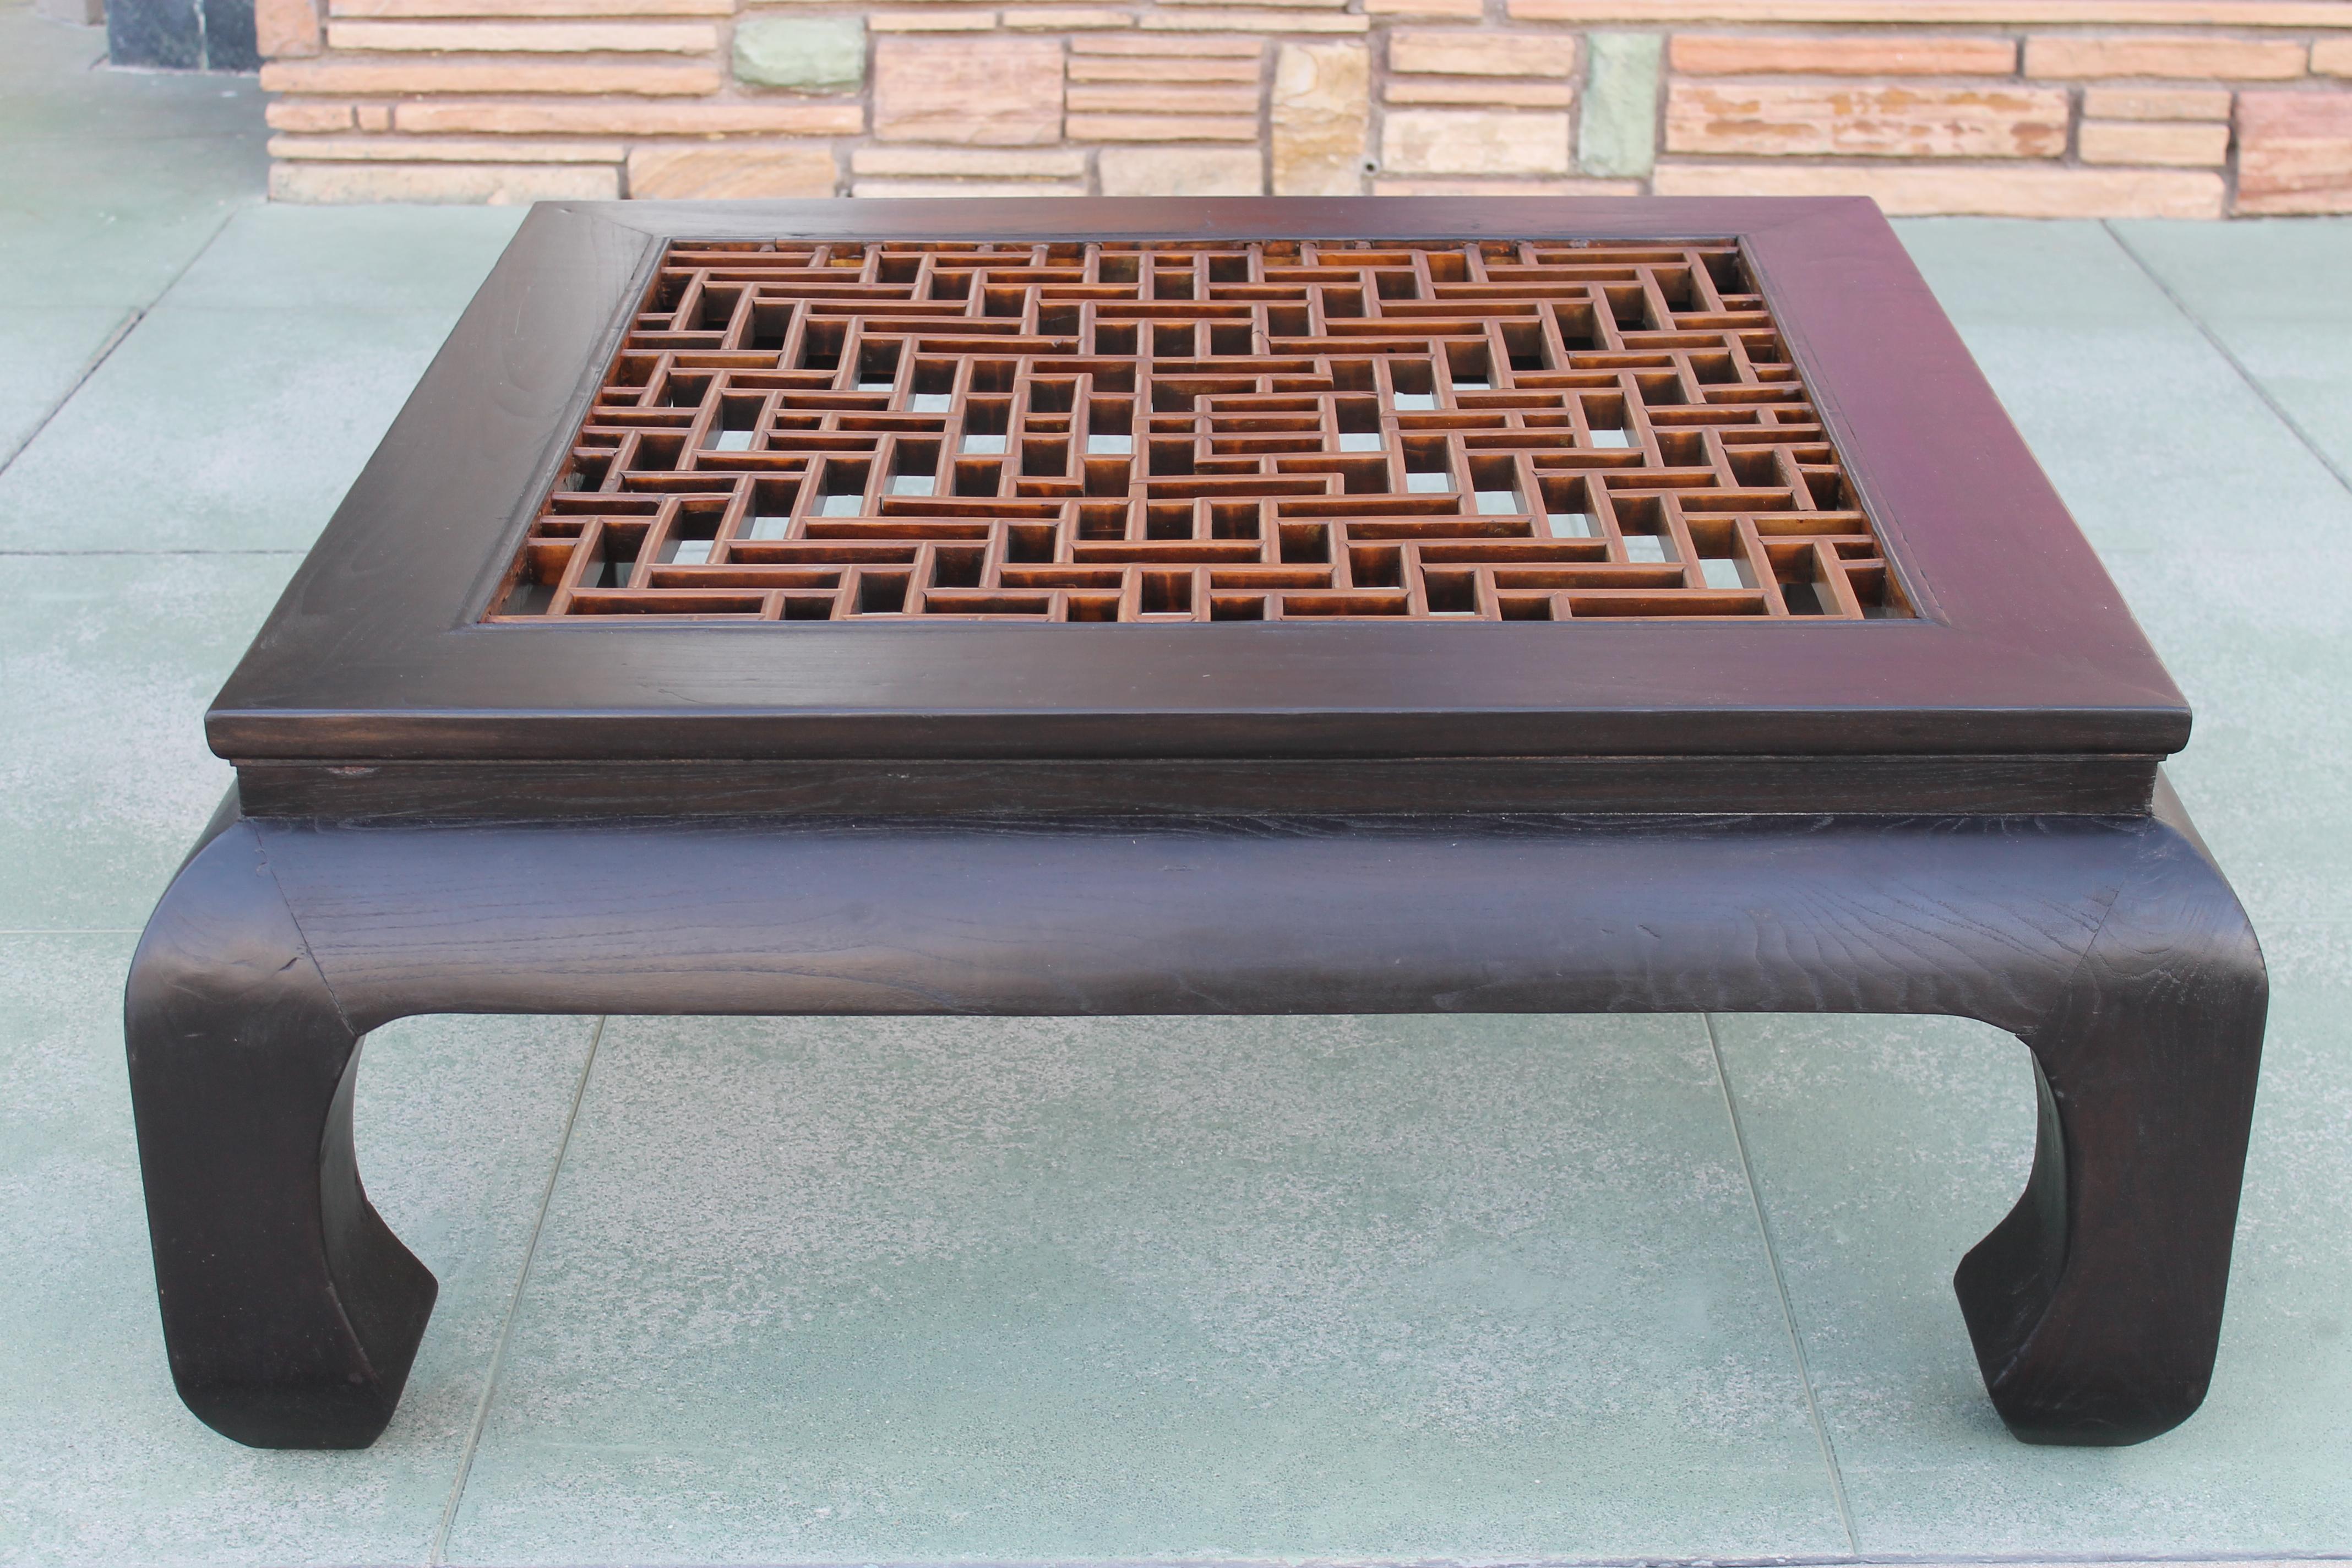 A Ming style table in ebonized oak with handcrafted (with tiny pegs) solid mahogany fretwork. Glass insert measures 30.25